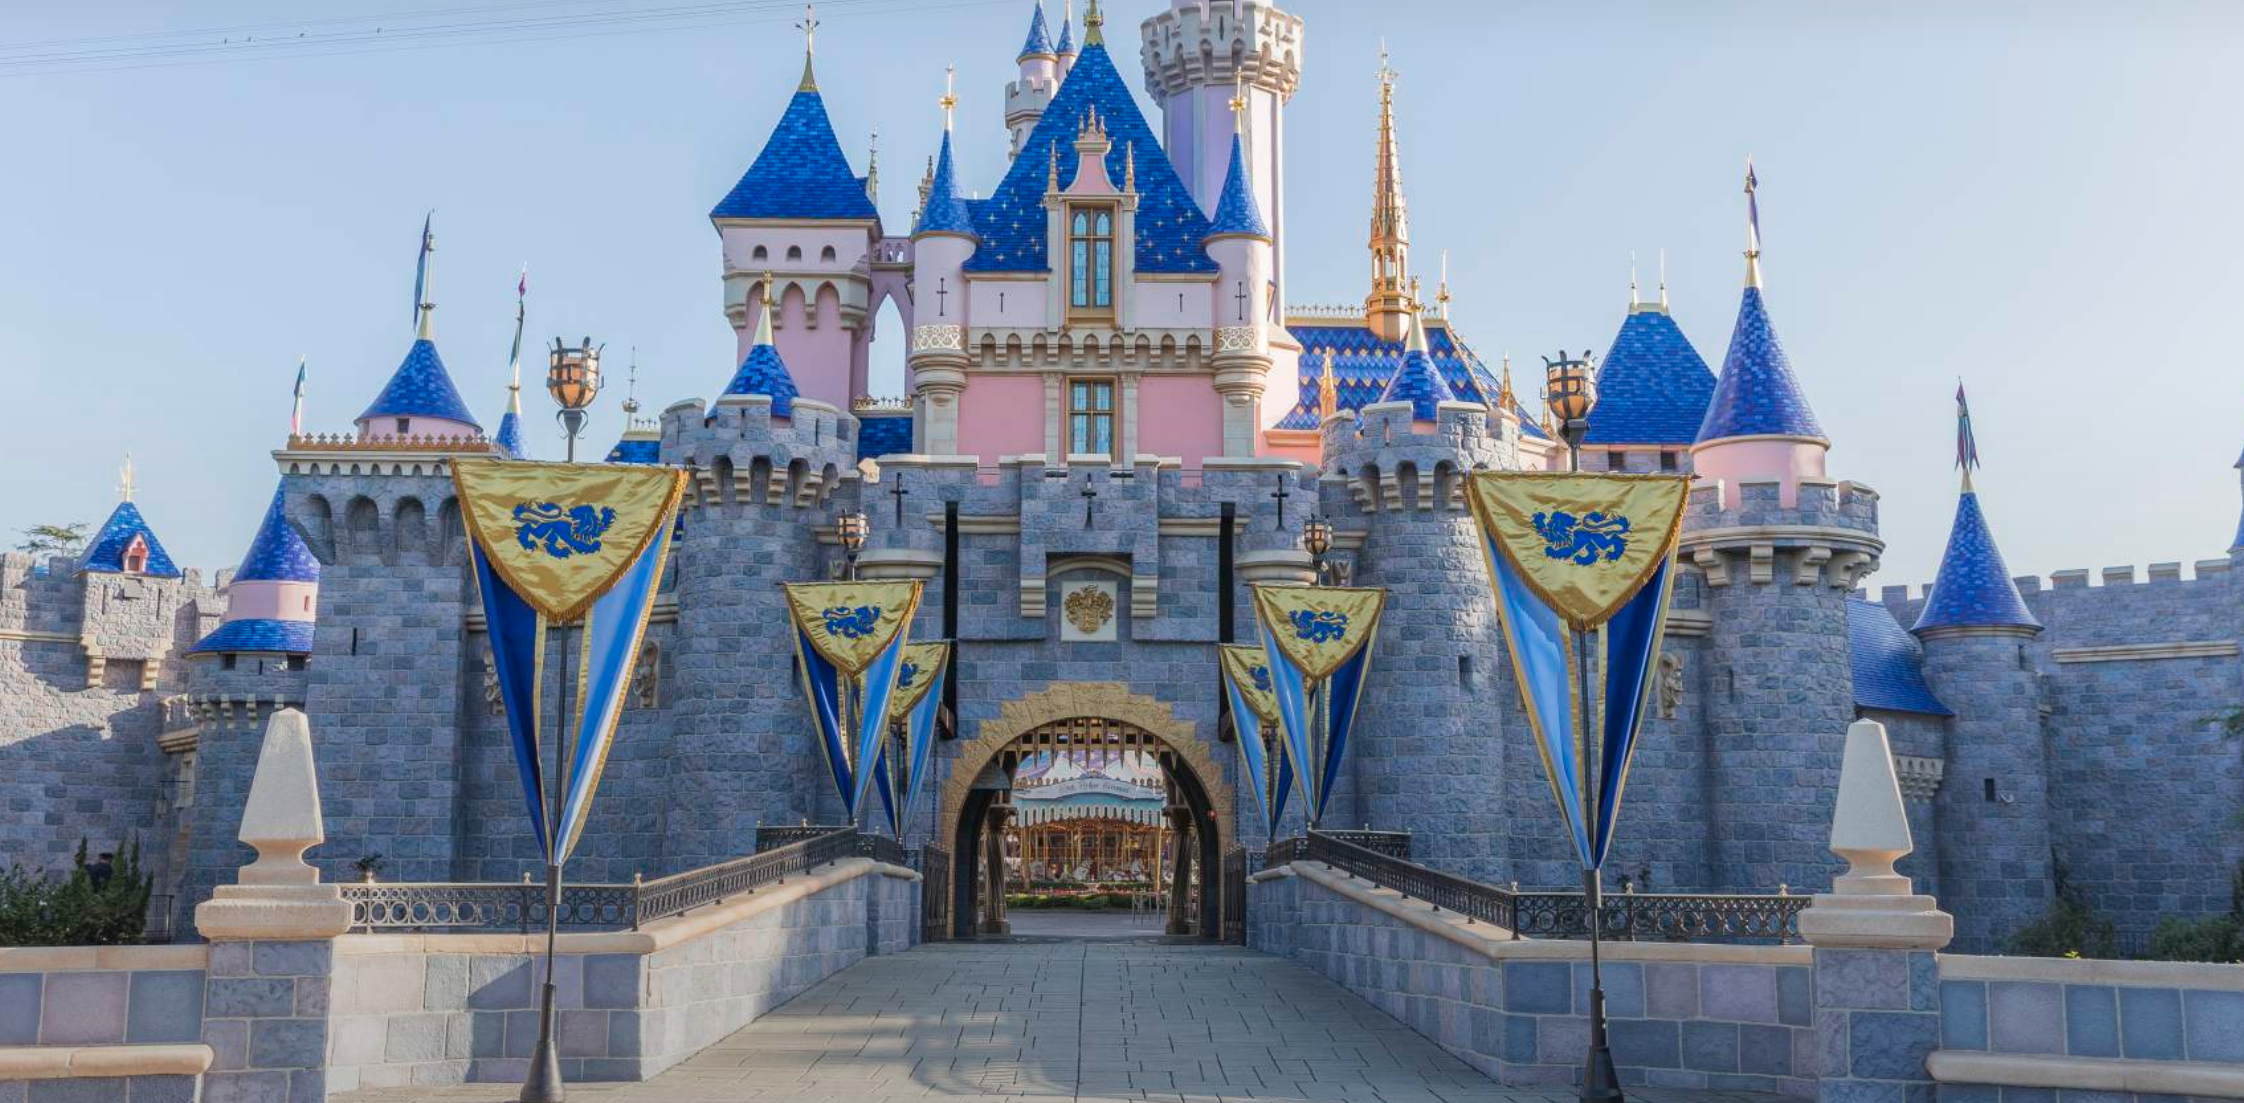 Video: For the First Time in Forever celebrates Disneyland Reopening